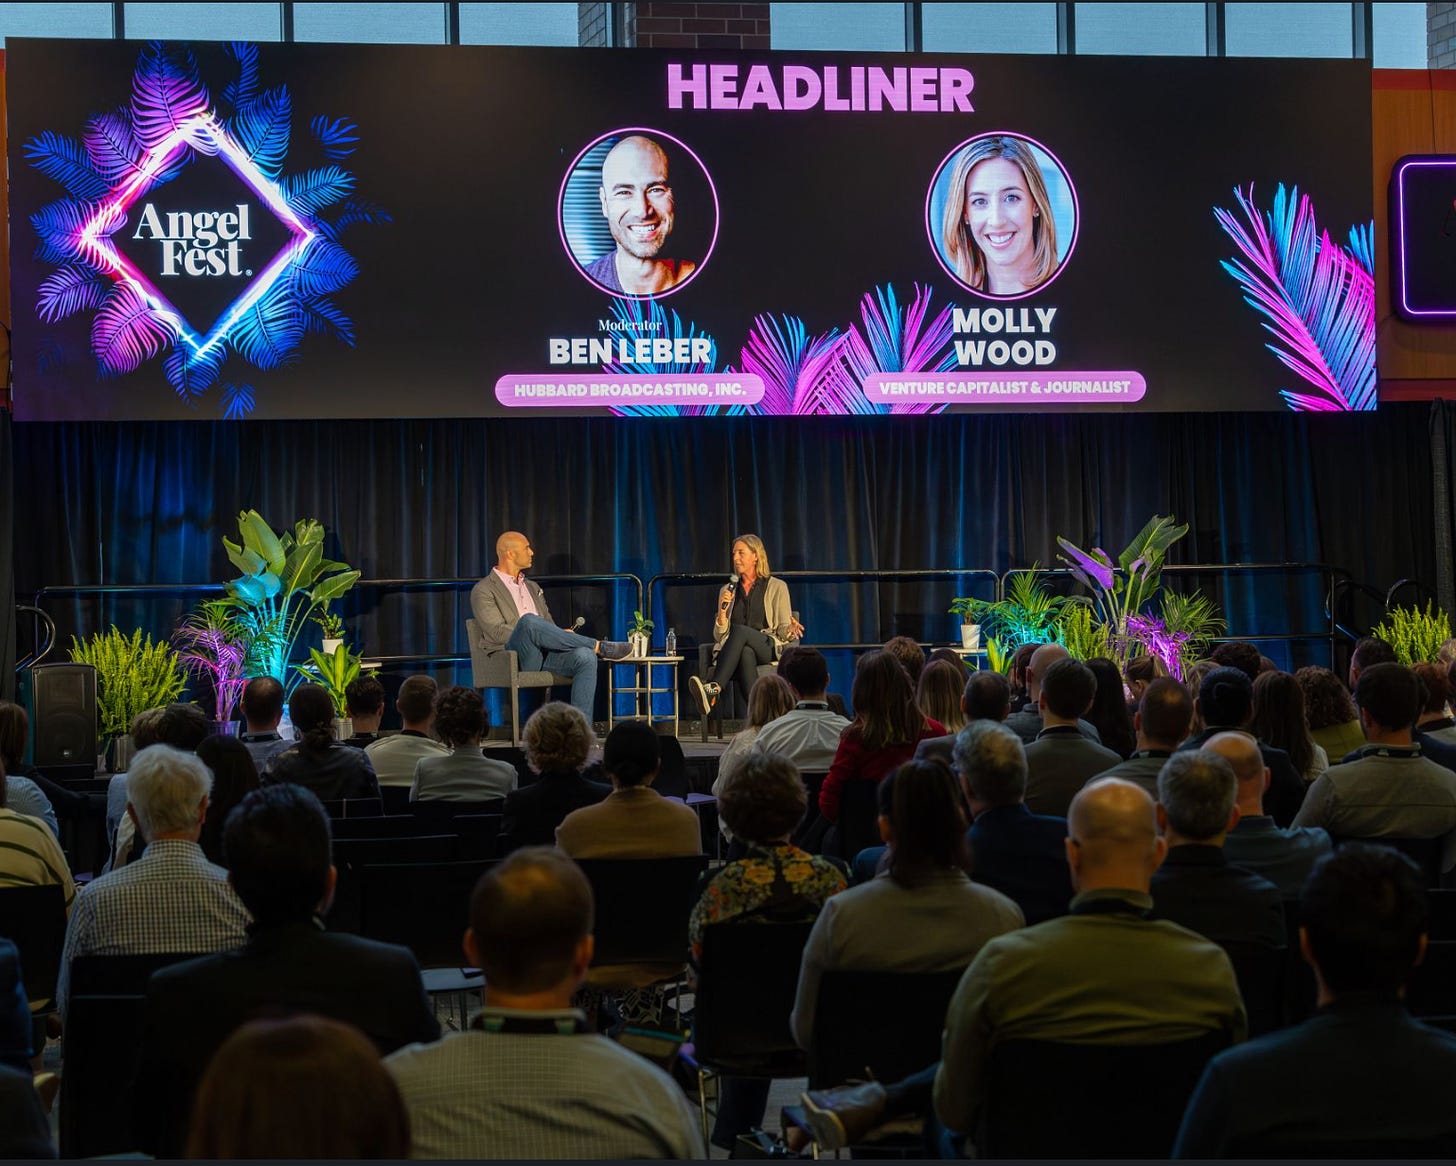 A photo of Molly Wood and Ben Leber in conversation on a stage with an audience in front of them. A banner above them reads HEADLINER and has their names and photos.